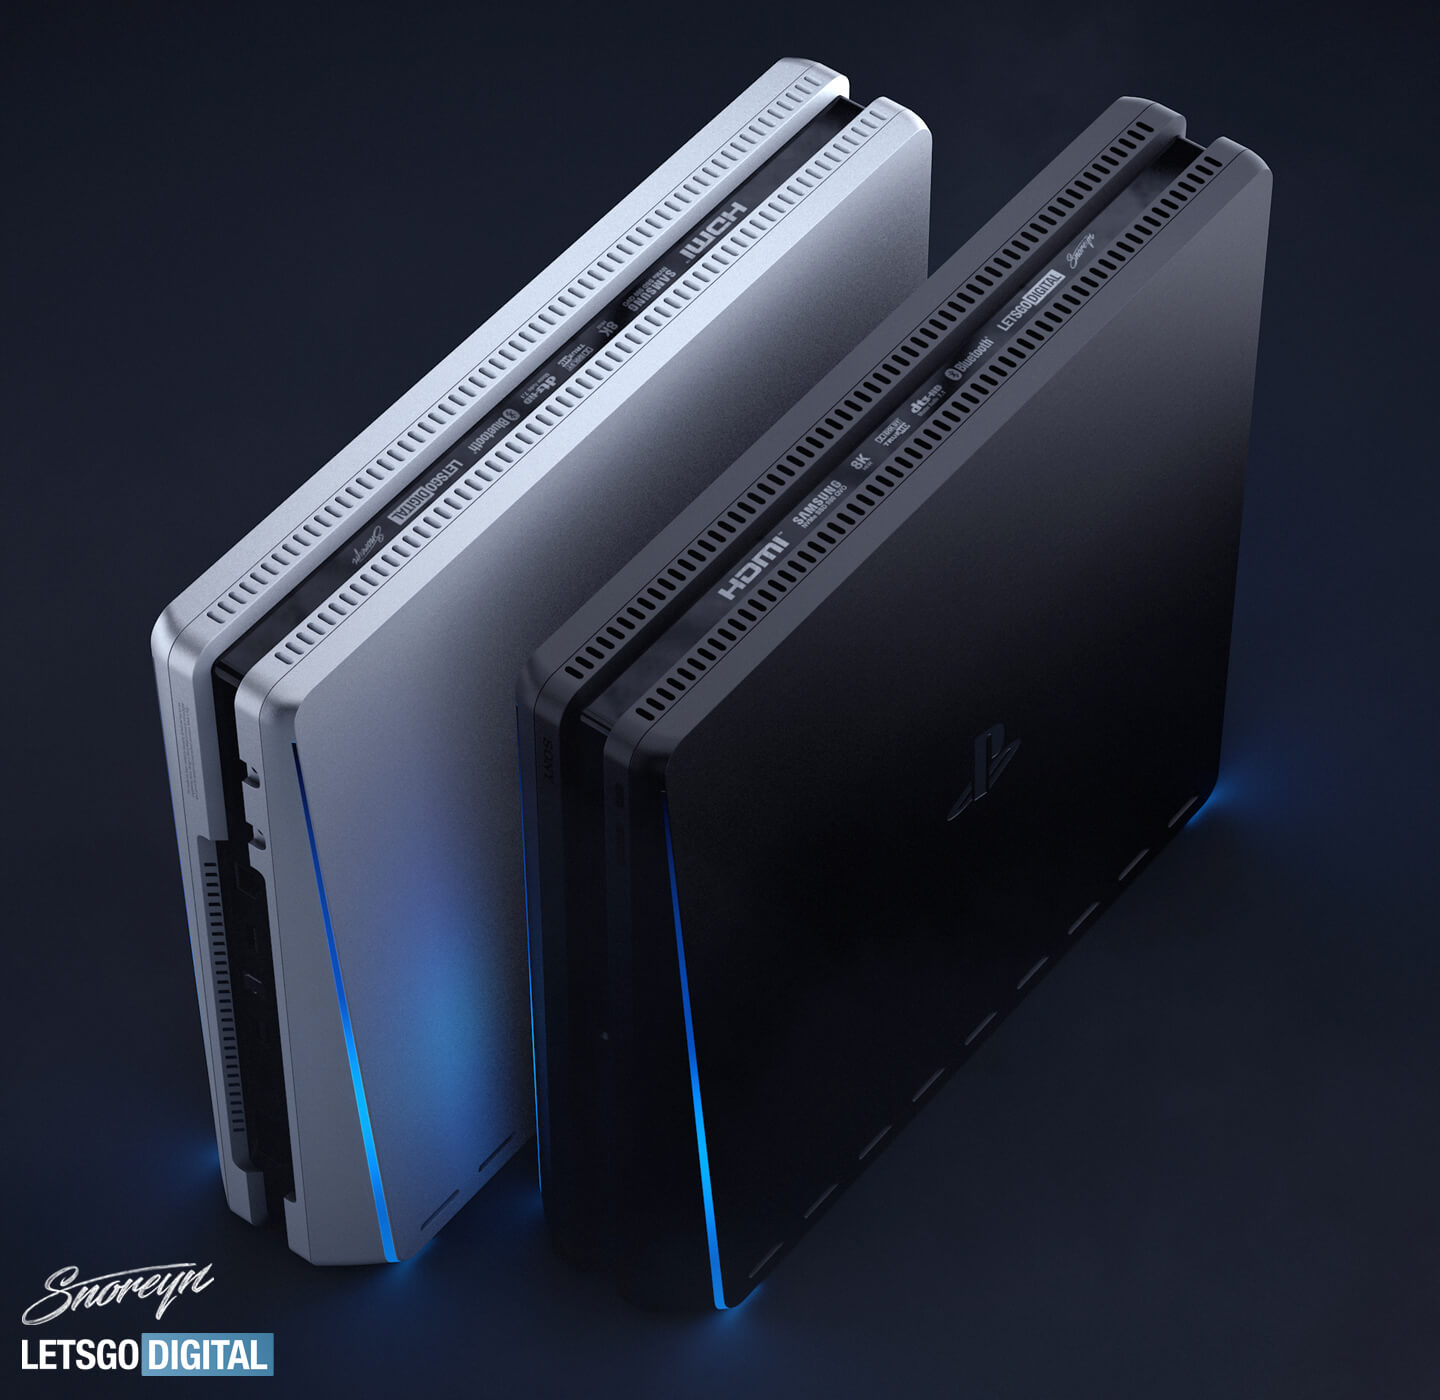 news on the ps5